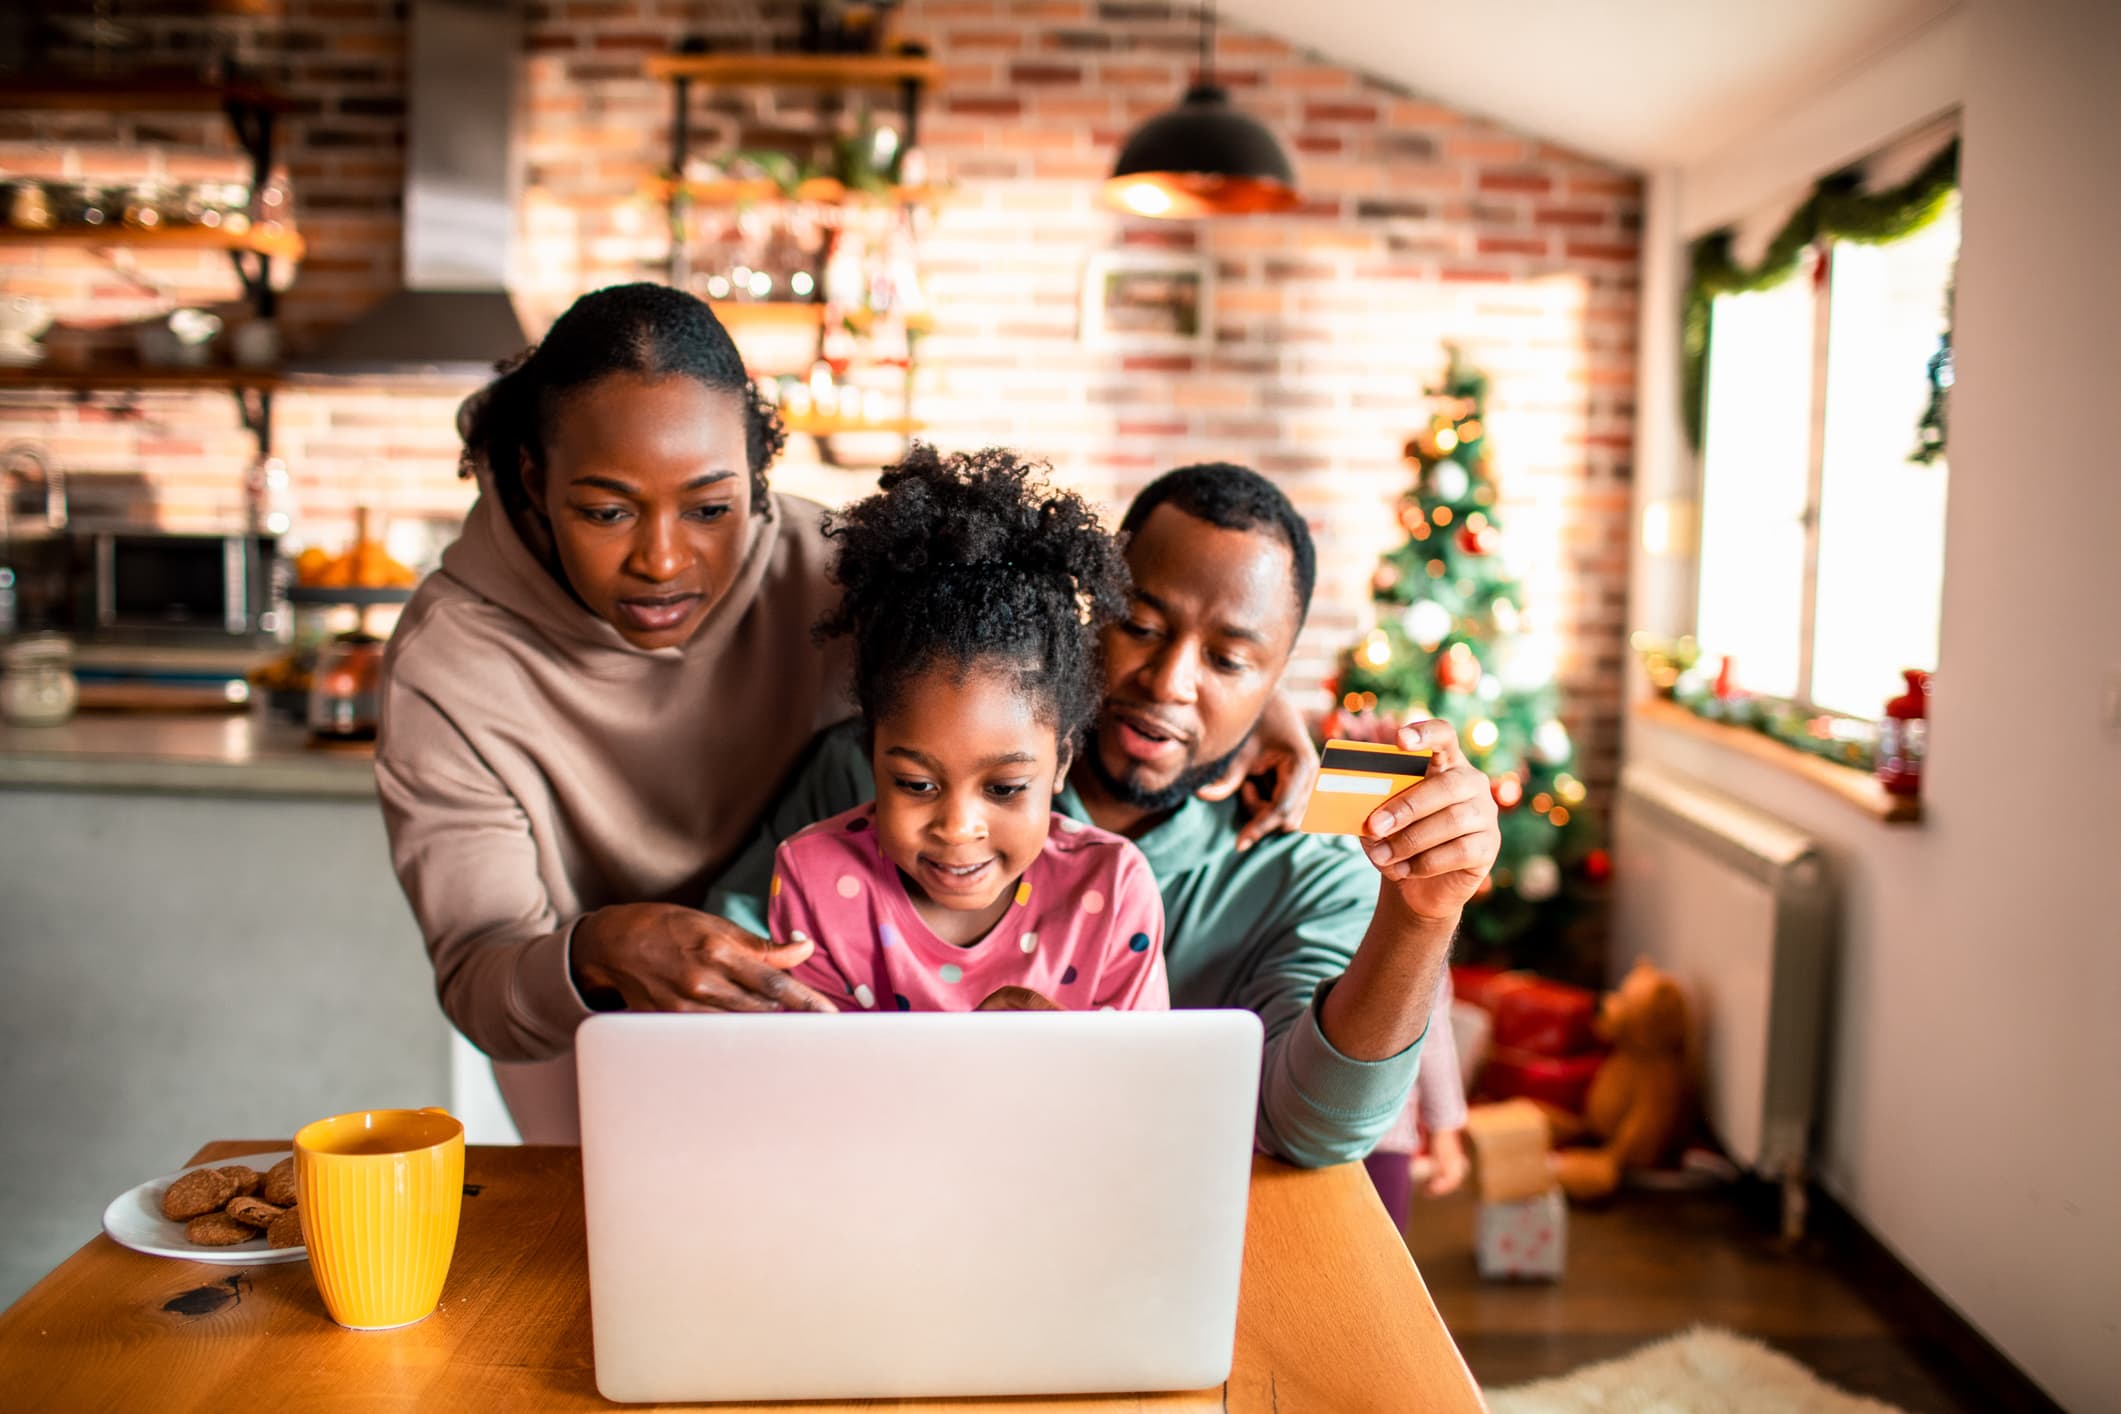 How To Get The Most From Your Credit Card During The Holidays